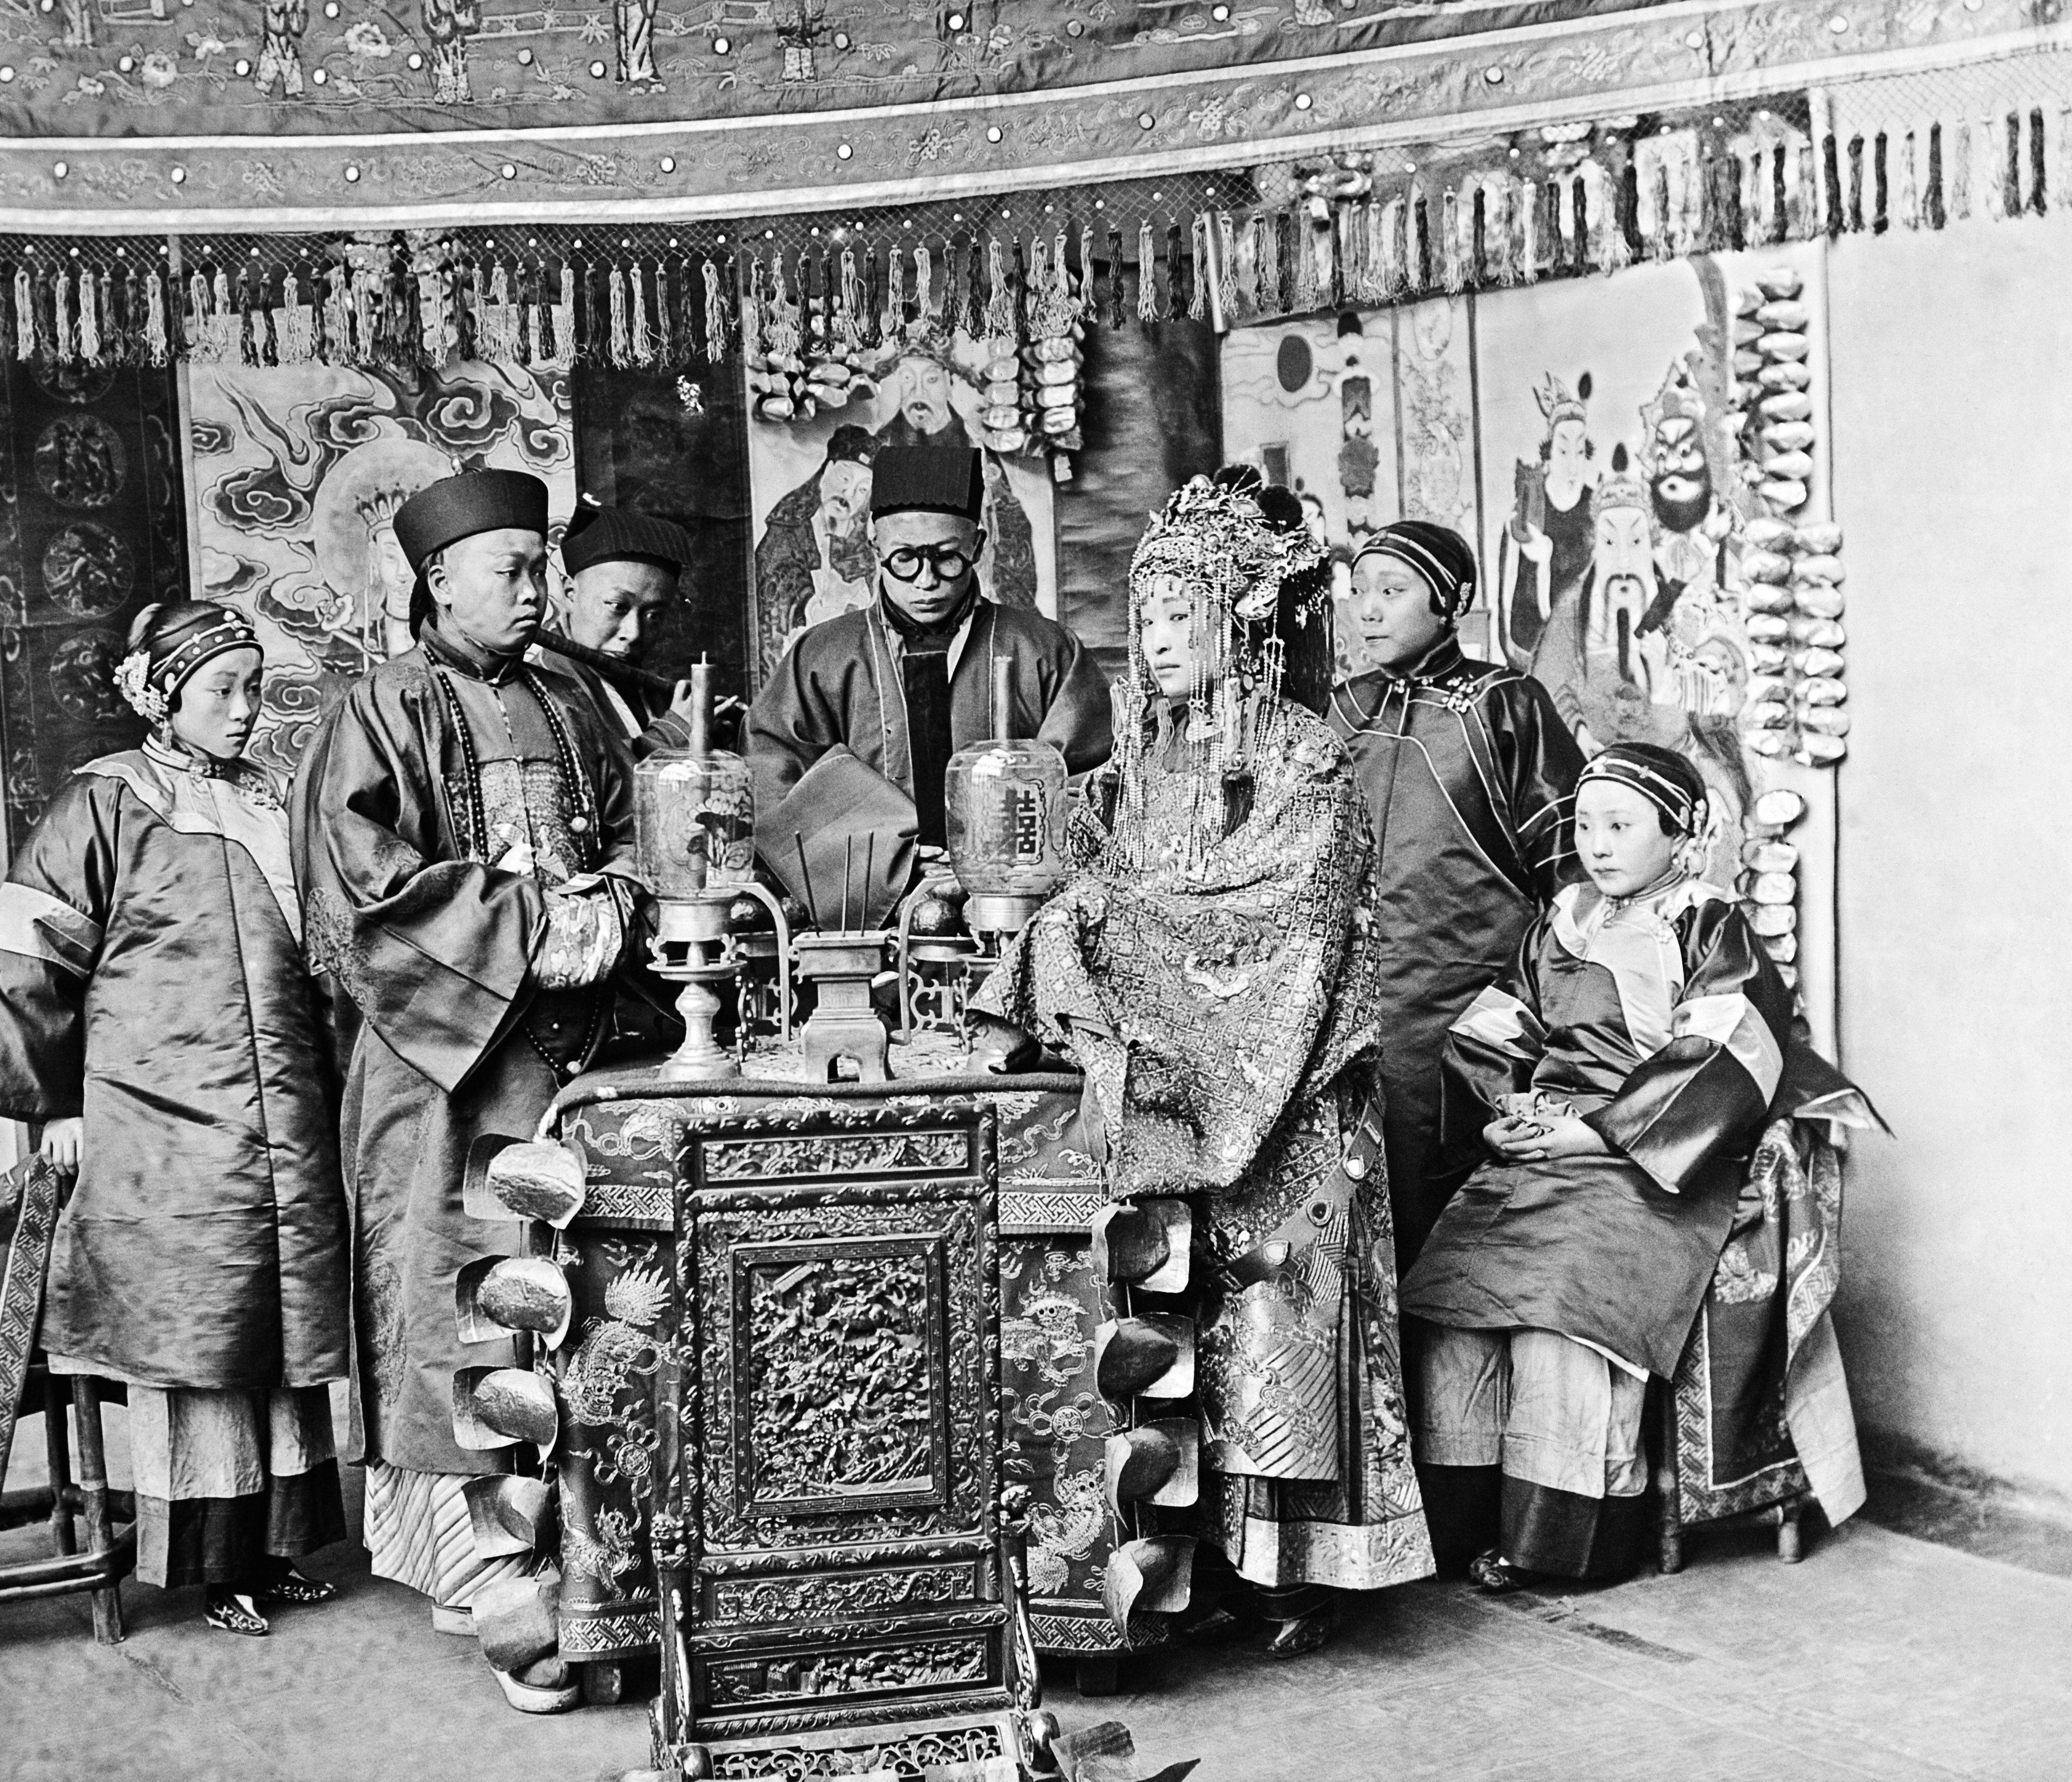 A wedding ceremony in China in around 1930. In ancient China, laws governed the giving of dowries to brides and their and their families’ rights to them. Photo: Getty Images